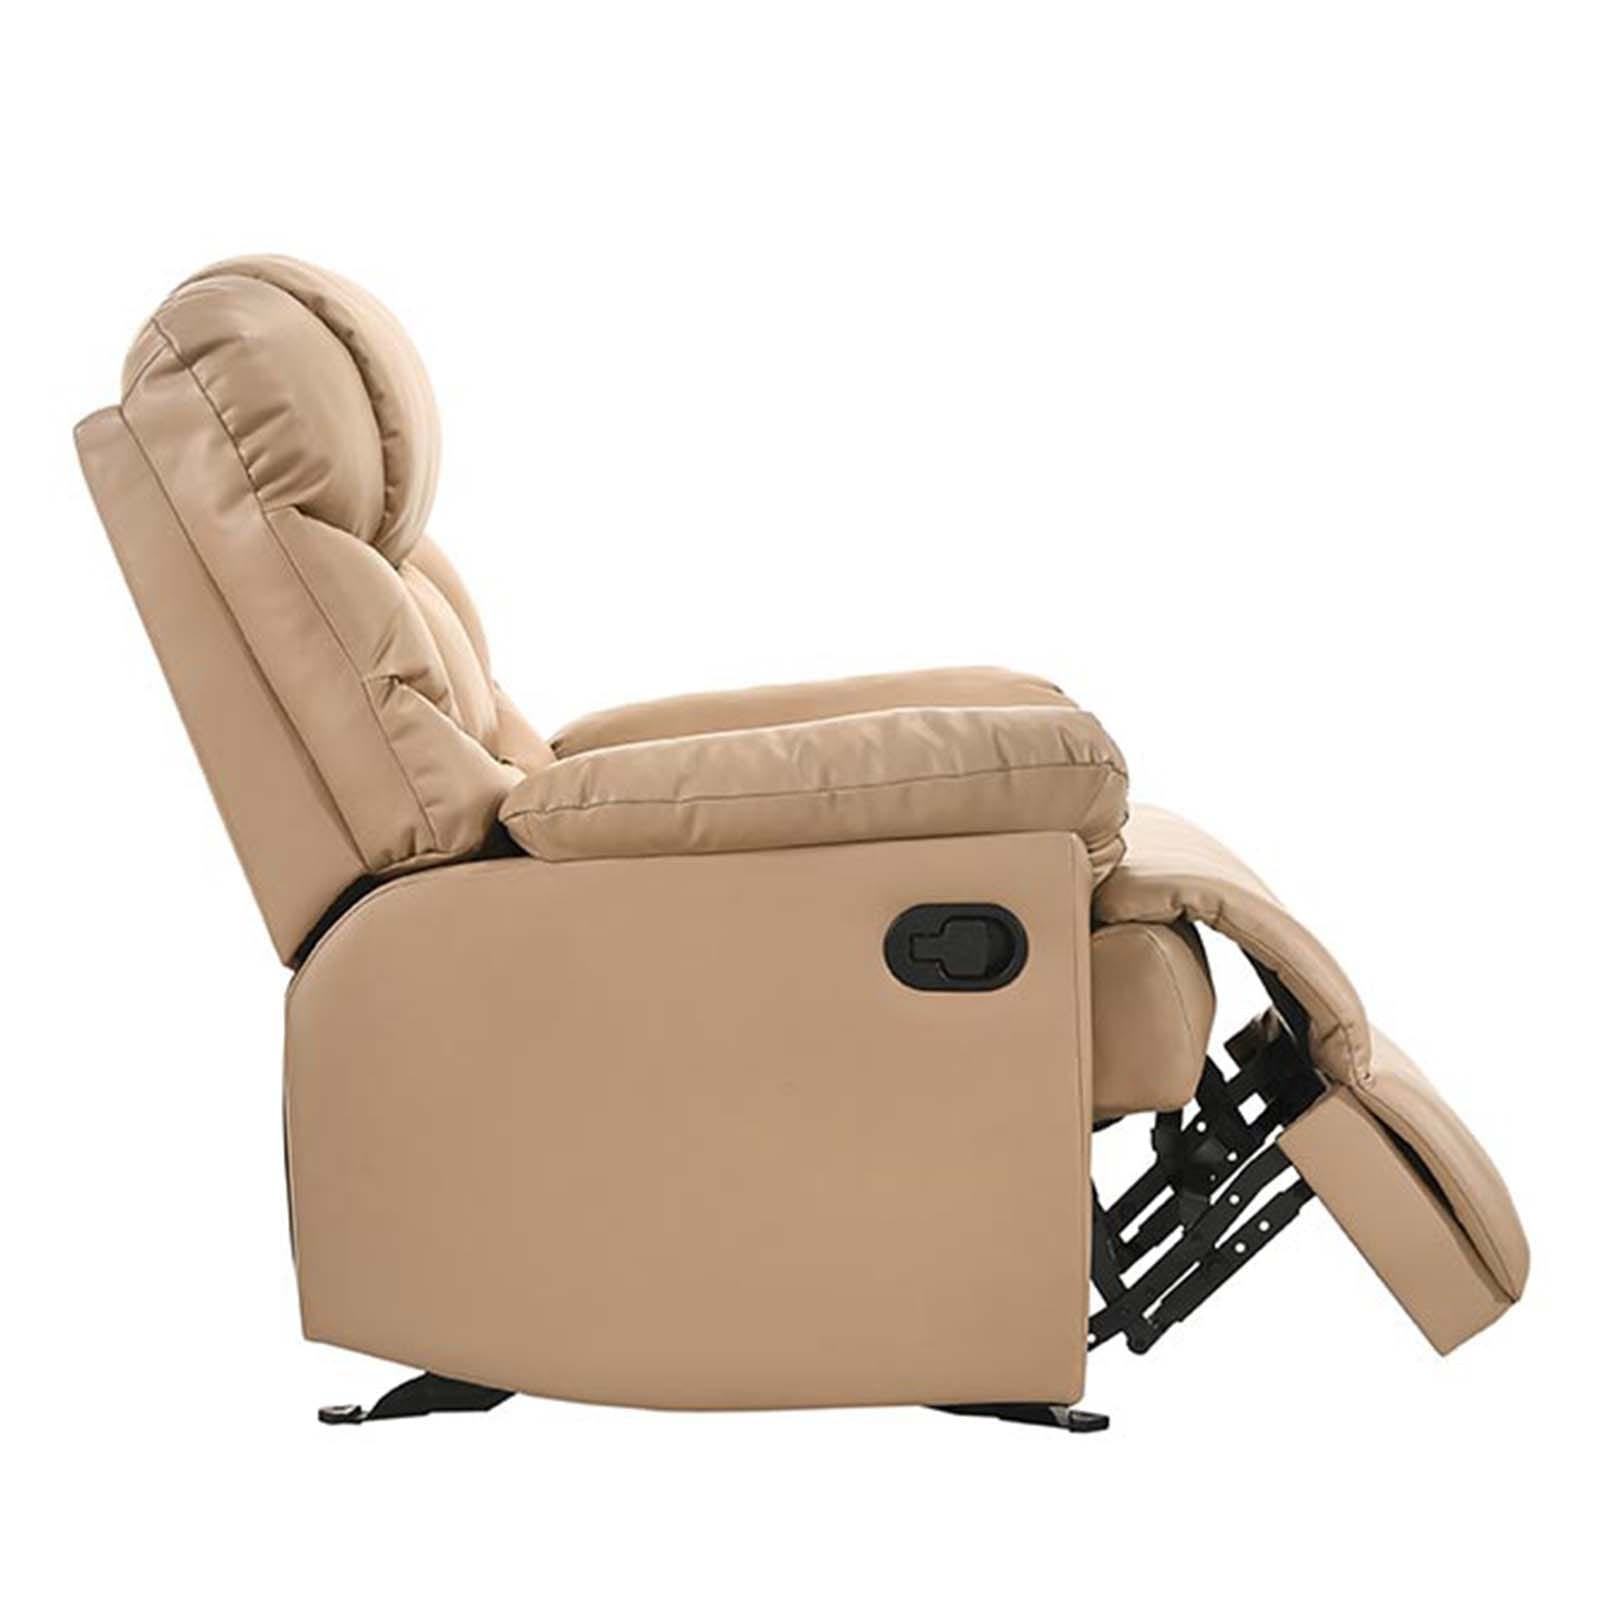 Leather Rocking Recliner Chair Beige 1095835 03 